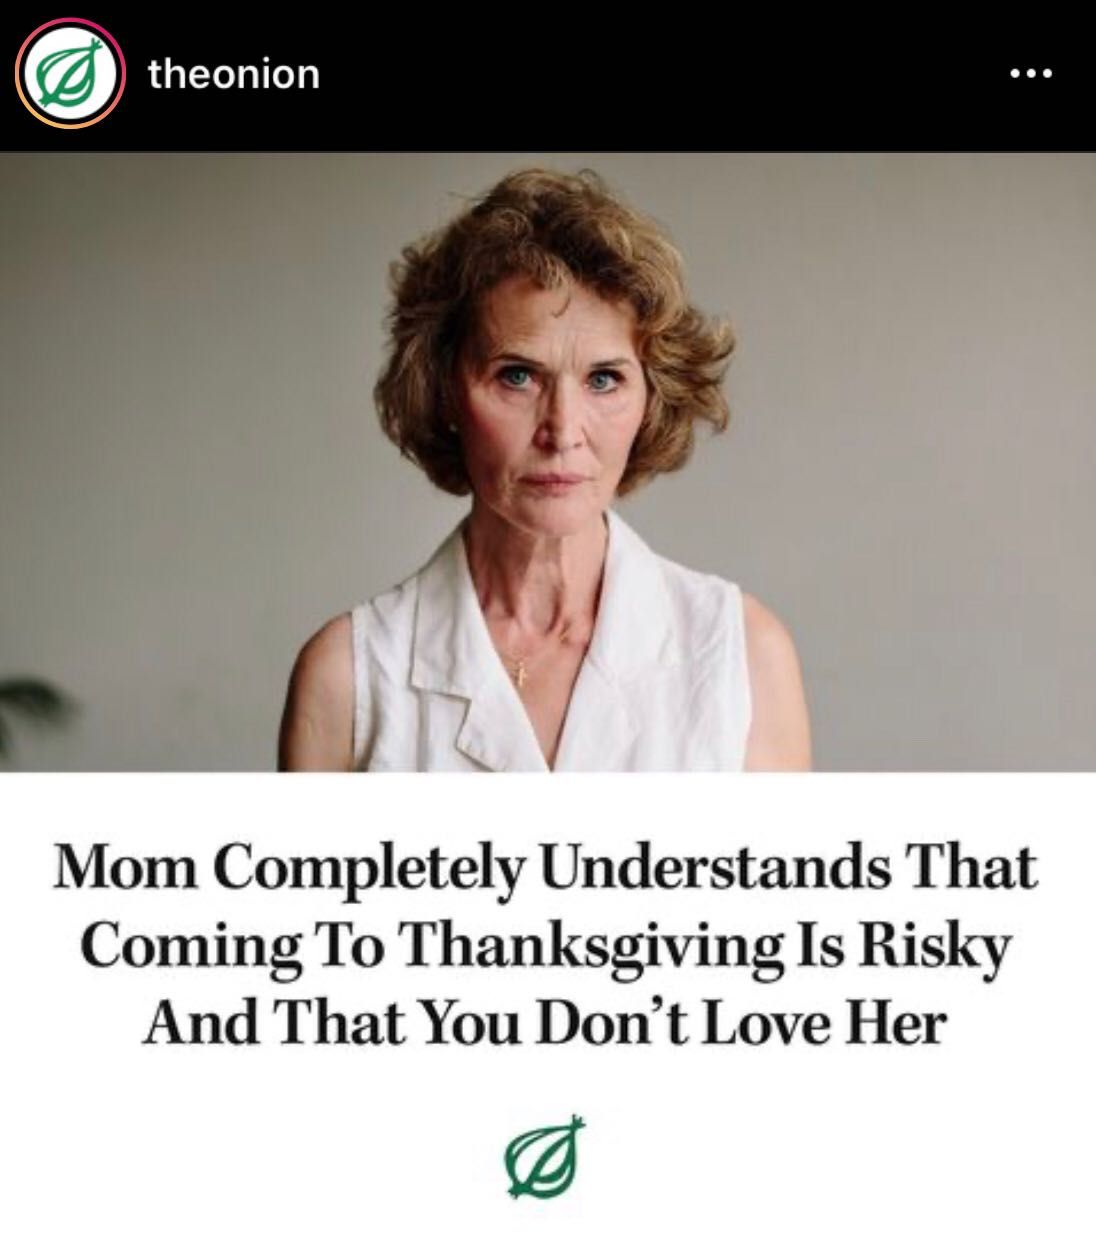 The Onion in 2020, where satire and reality are the same thing.